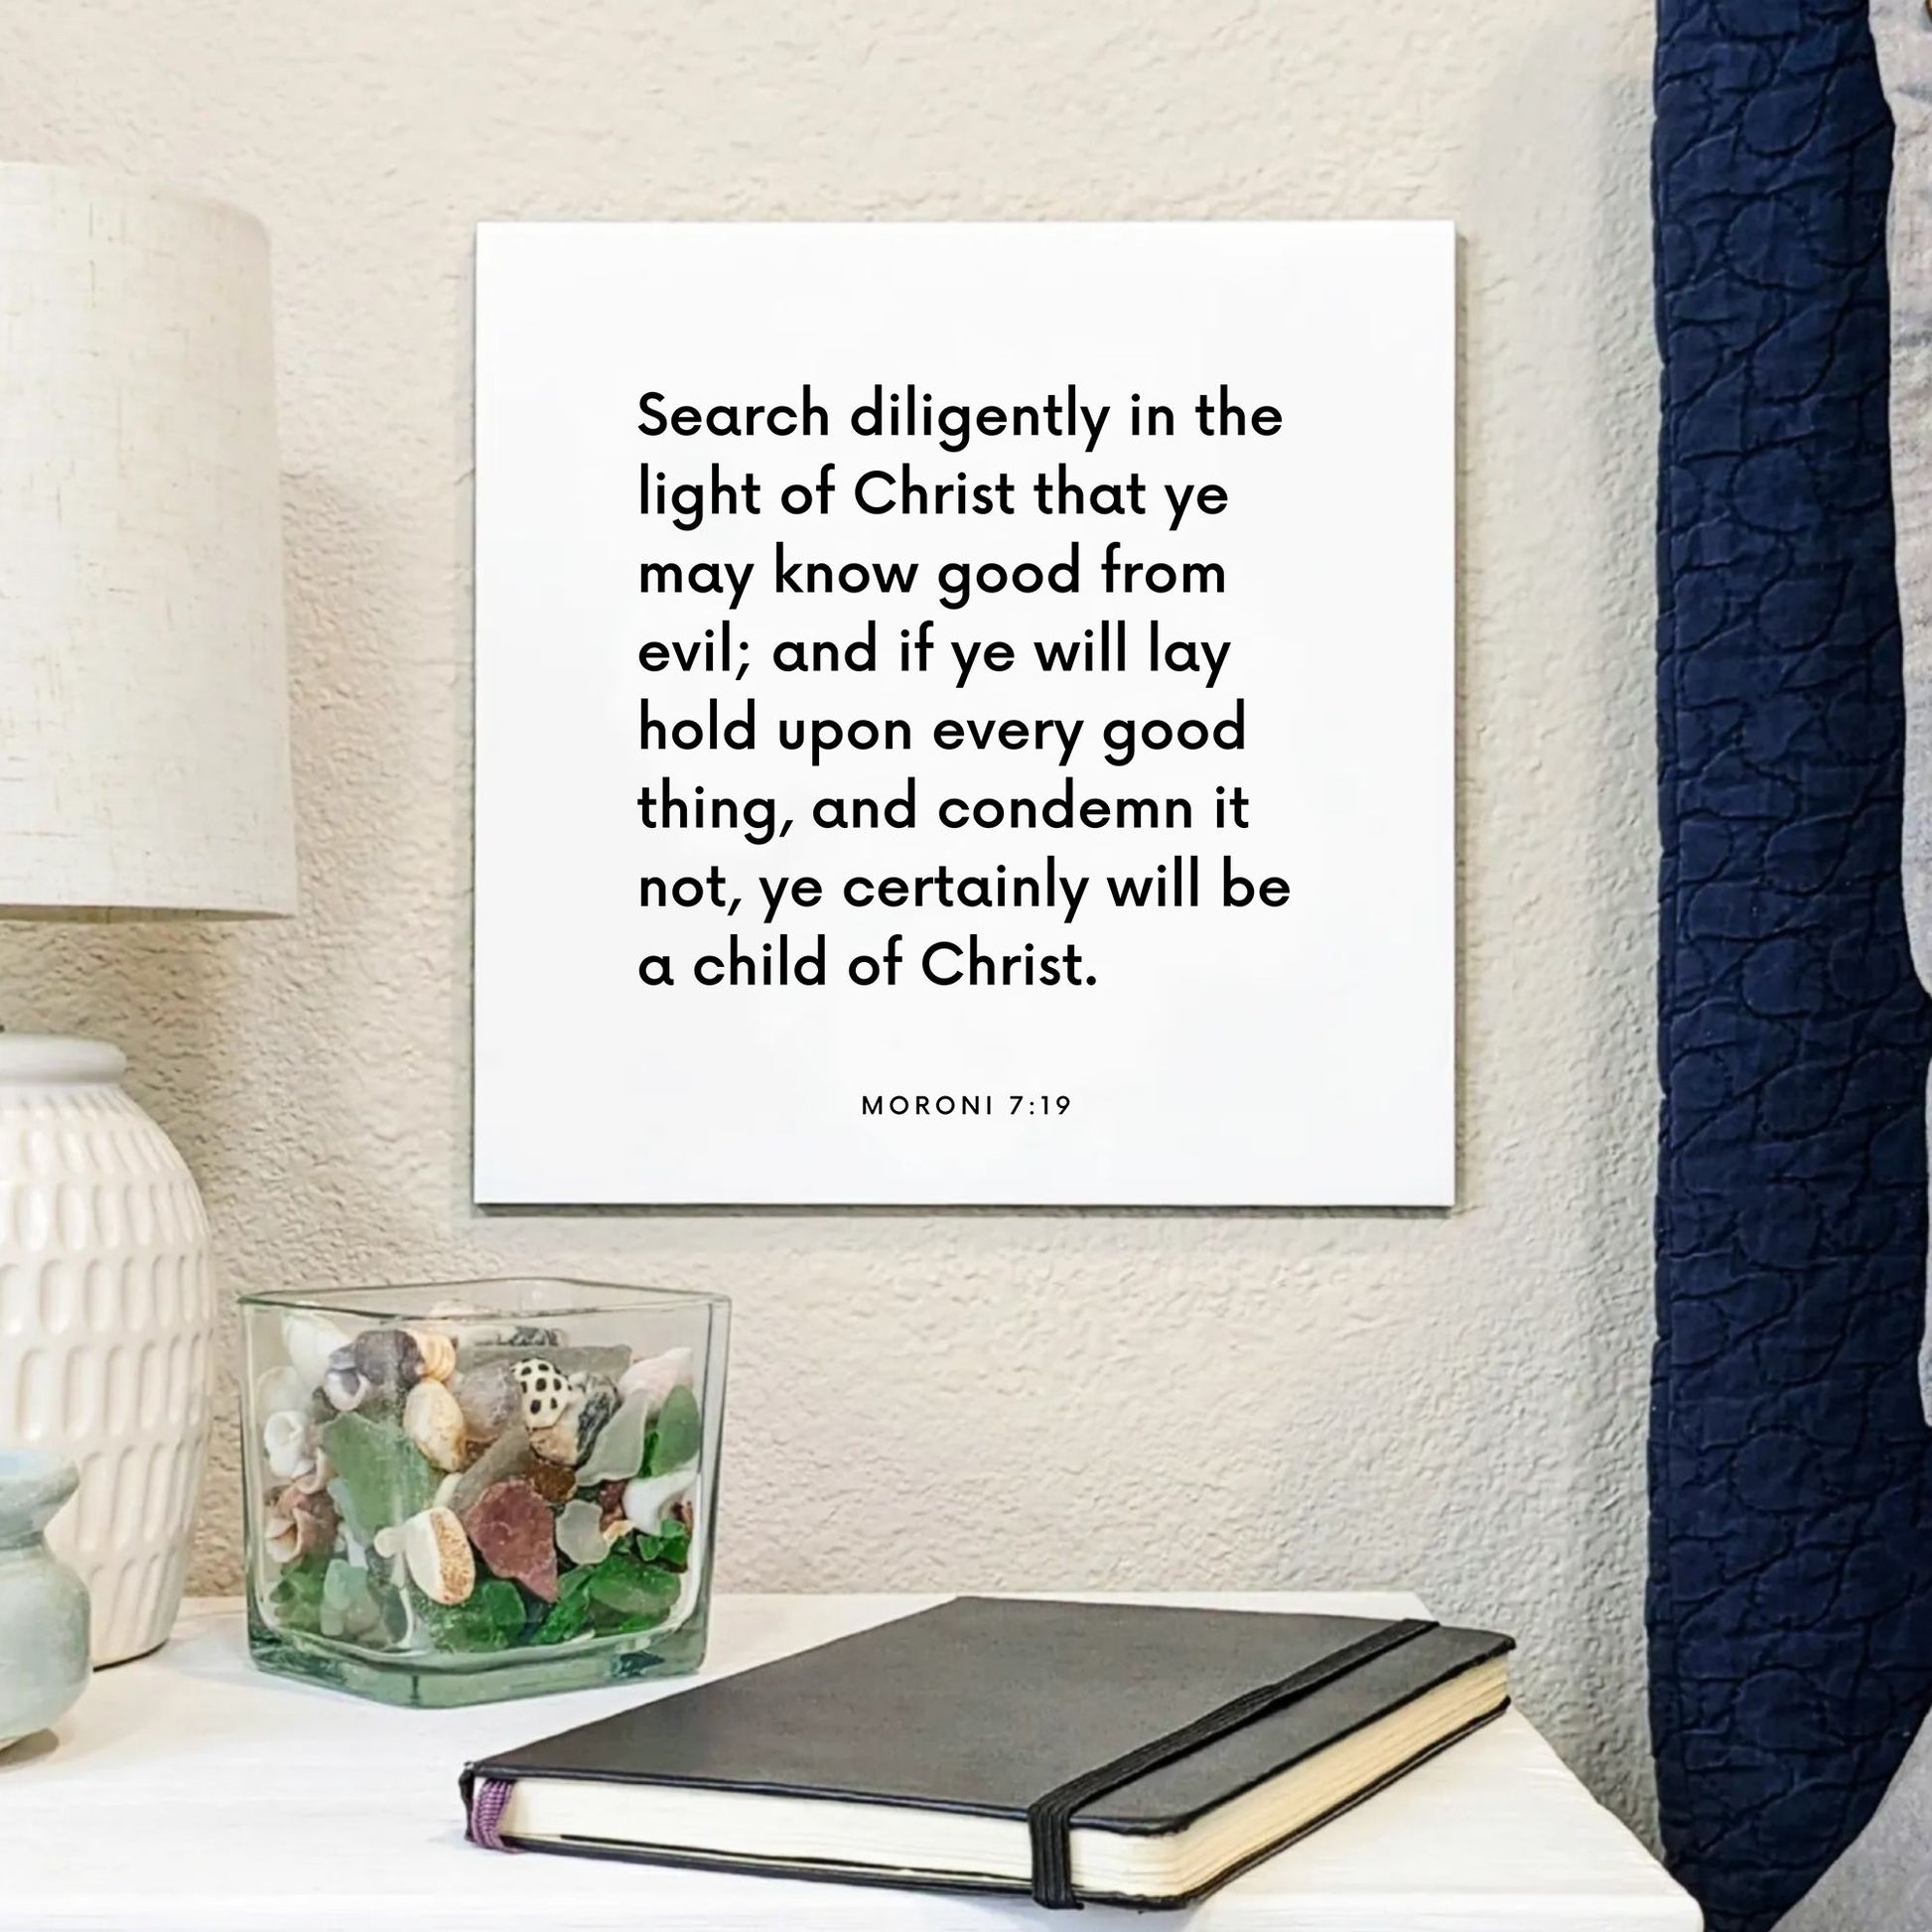 Bedside mouting of the scripture tile for Moroni 7:19 - "Search diligently in the light of Christ"